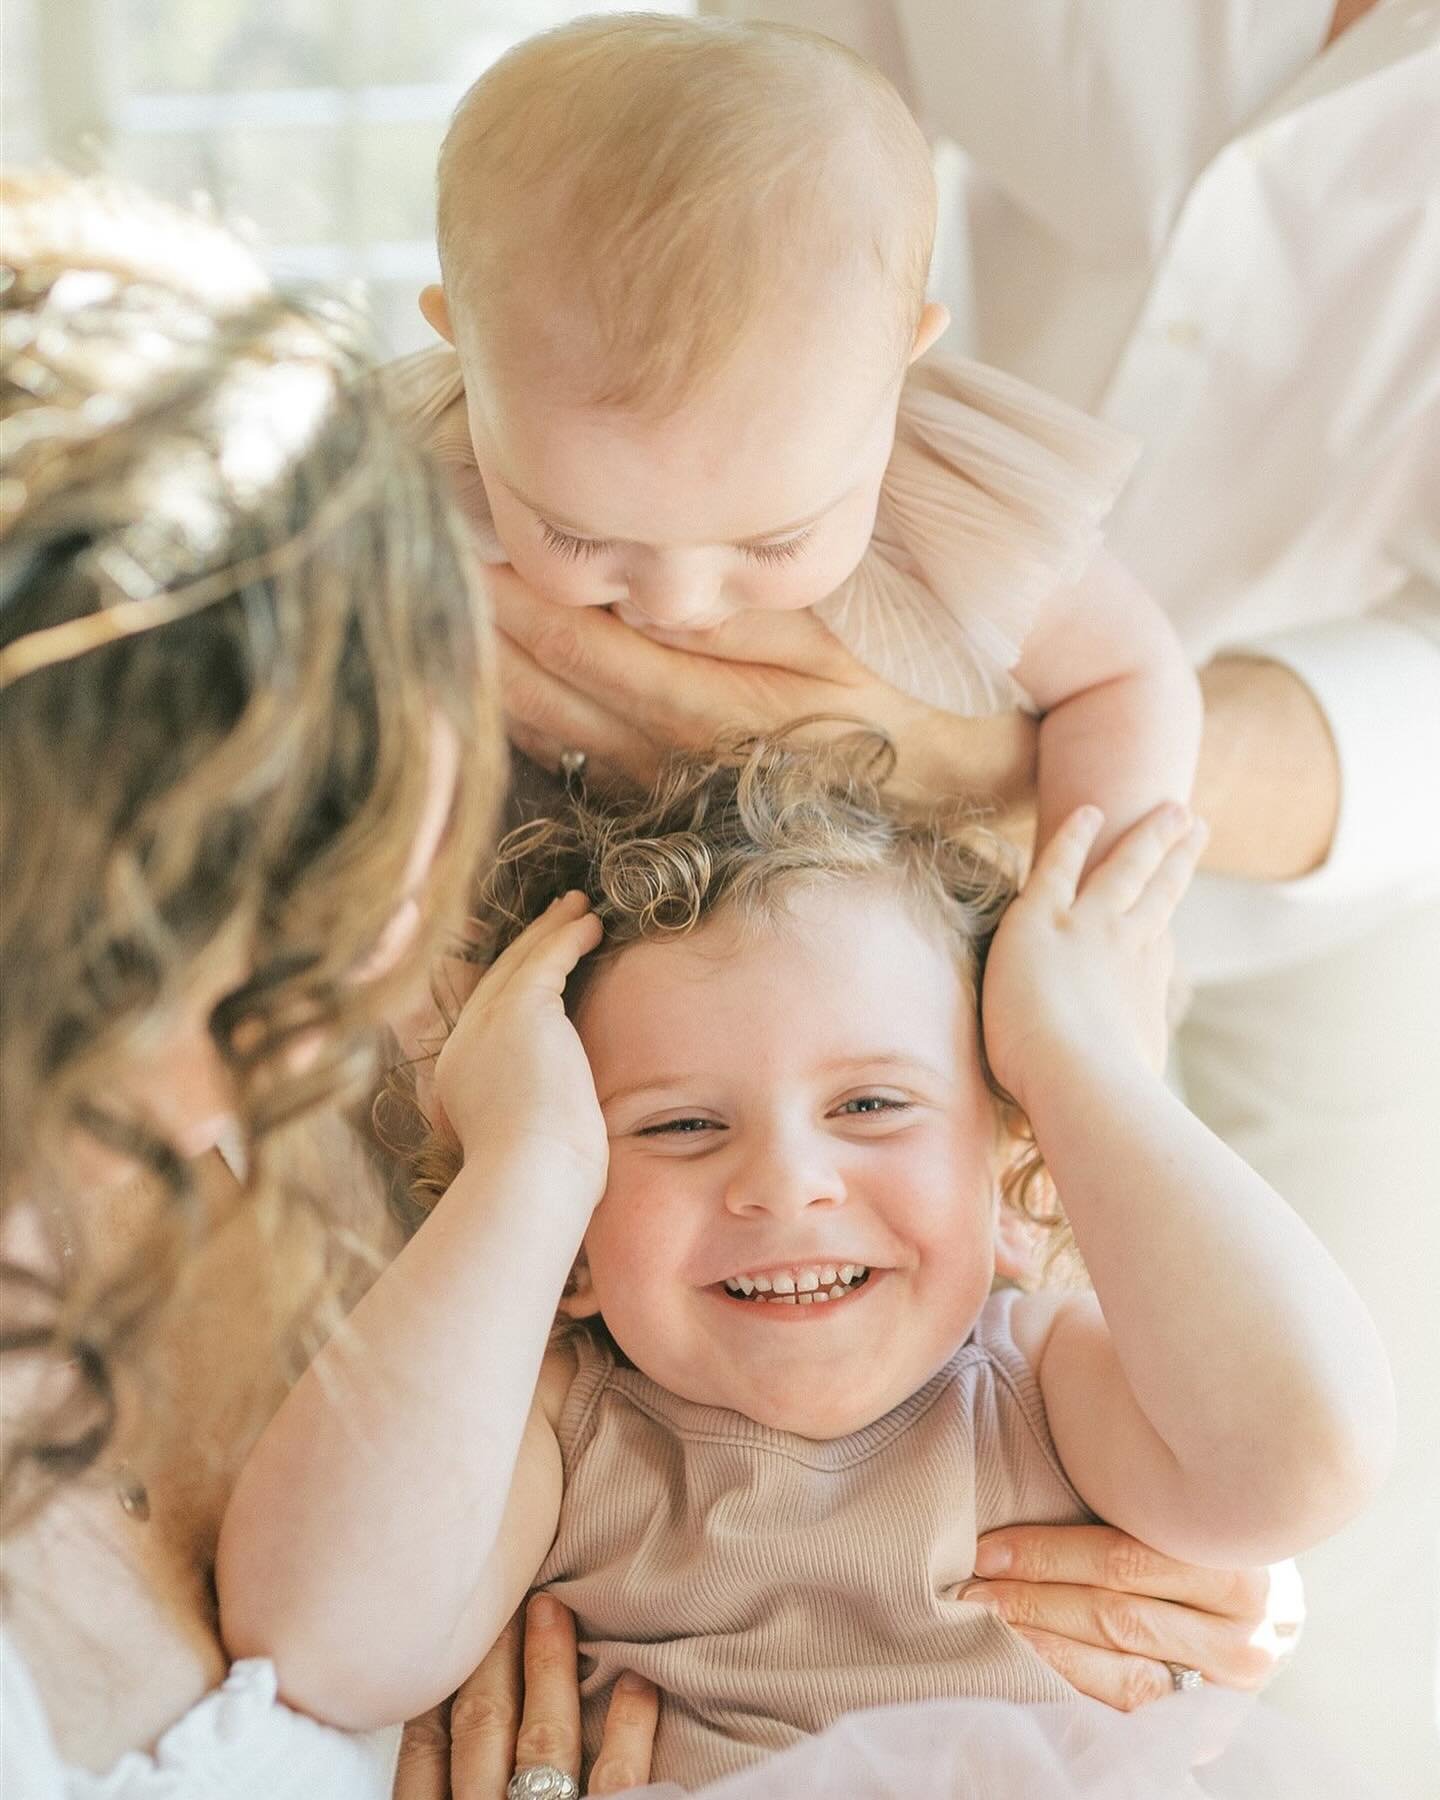 Details matter. 

Without them, your family&rsquo;s story wouldn&rsquo;t be complete. 

As a mama serving other mamas, I preserve the authentic and joyful memories of motherhood, and that especially includes all the little details you never want to f